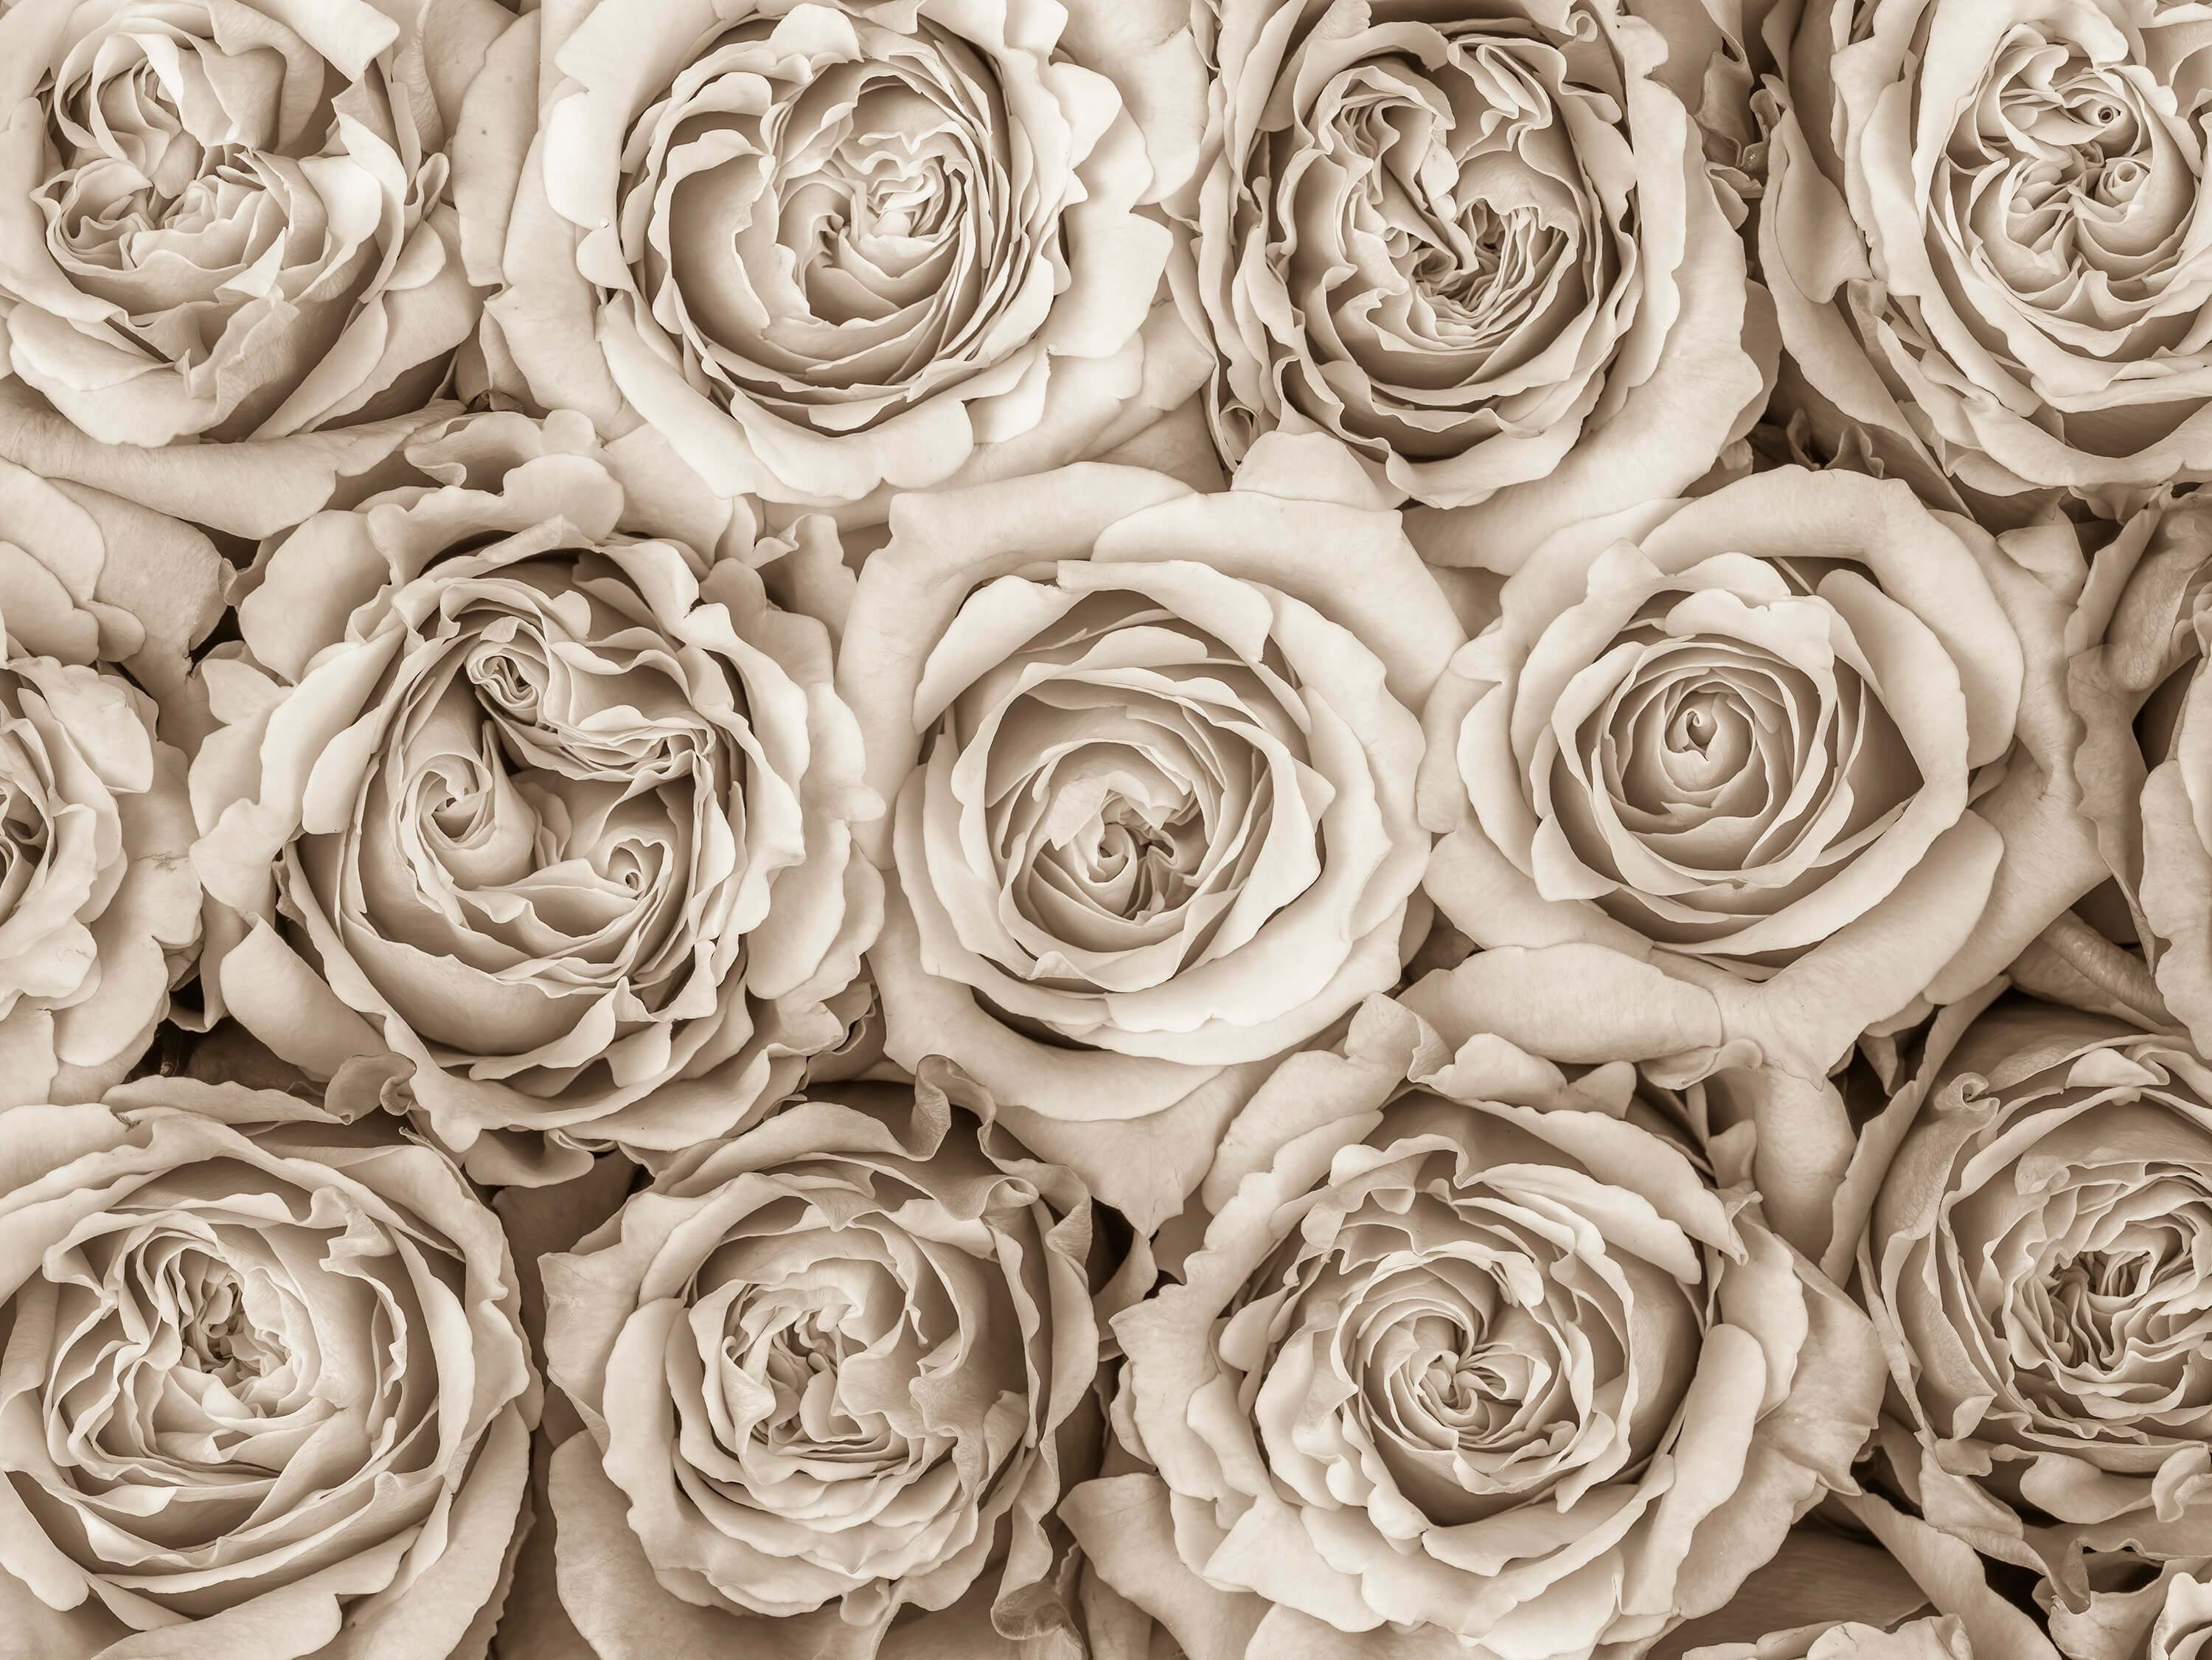  Background of roses